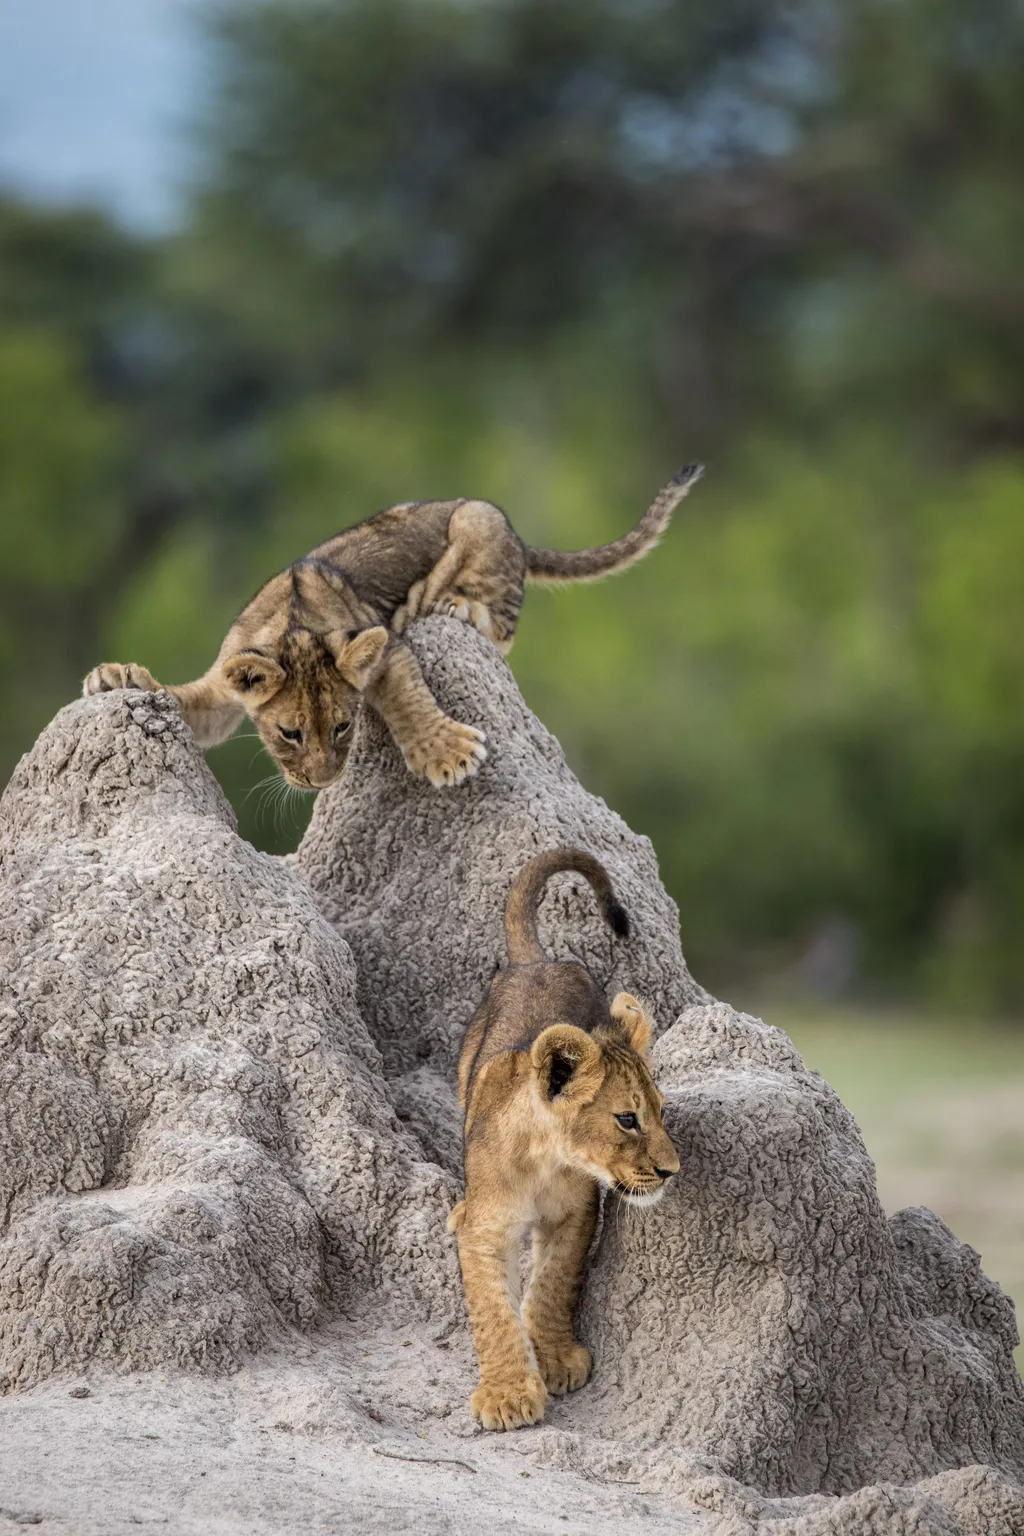 Comedy Wildlife Photography Awards 2020 nyertes képek 2020
Olin Rogers
BEND
United States
Phone: 
Email: 
Title: I've got you this time!
Description: An African lion cub stalks his brother from atop a termite mound.
Animal: African lion cub
Location of sh